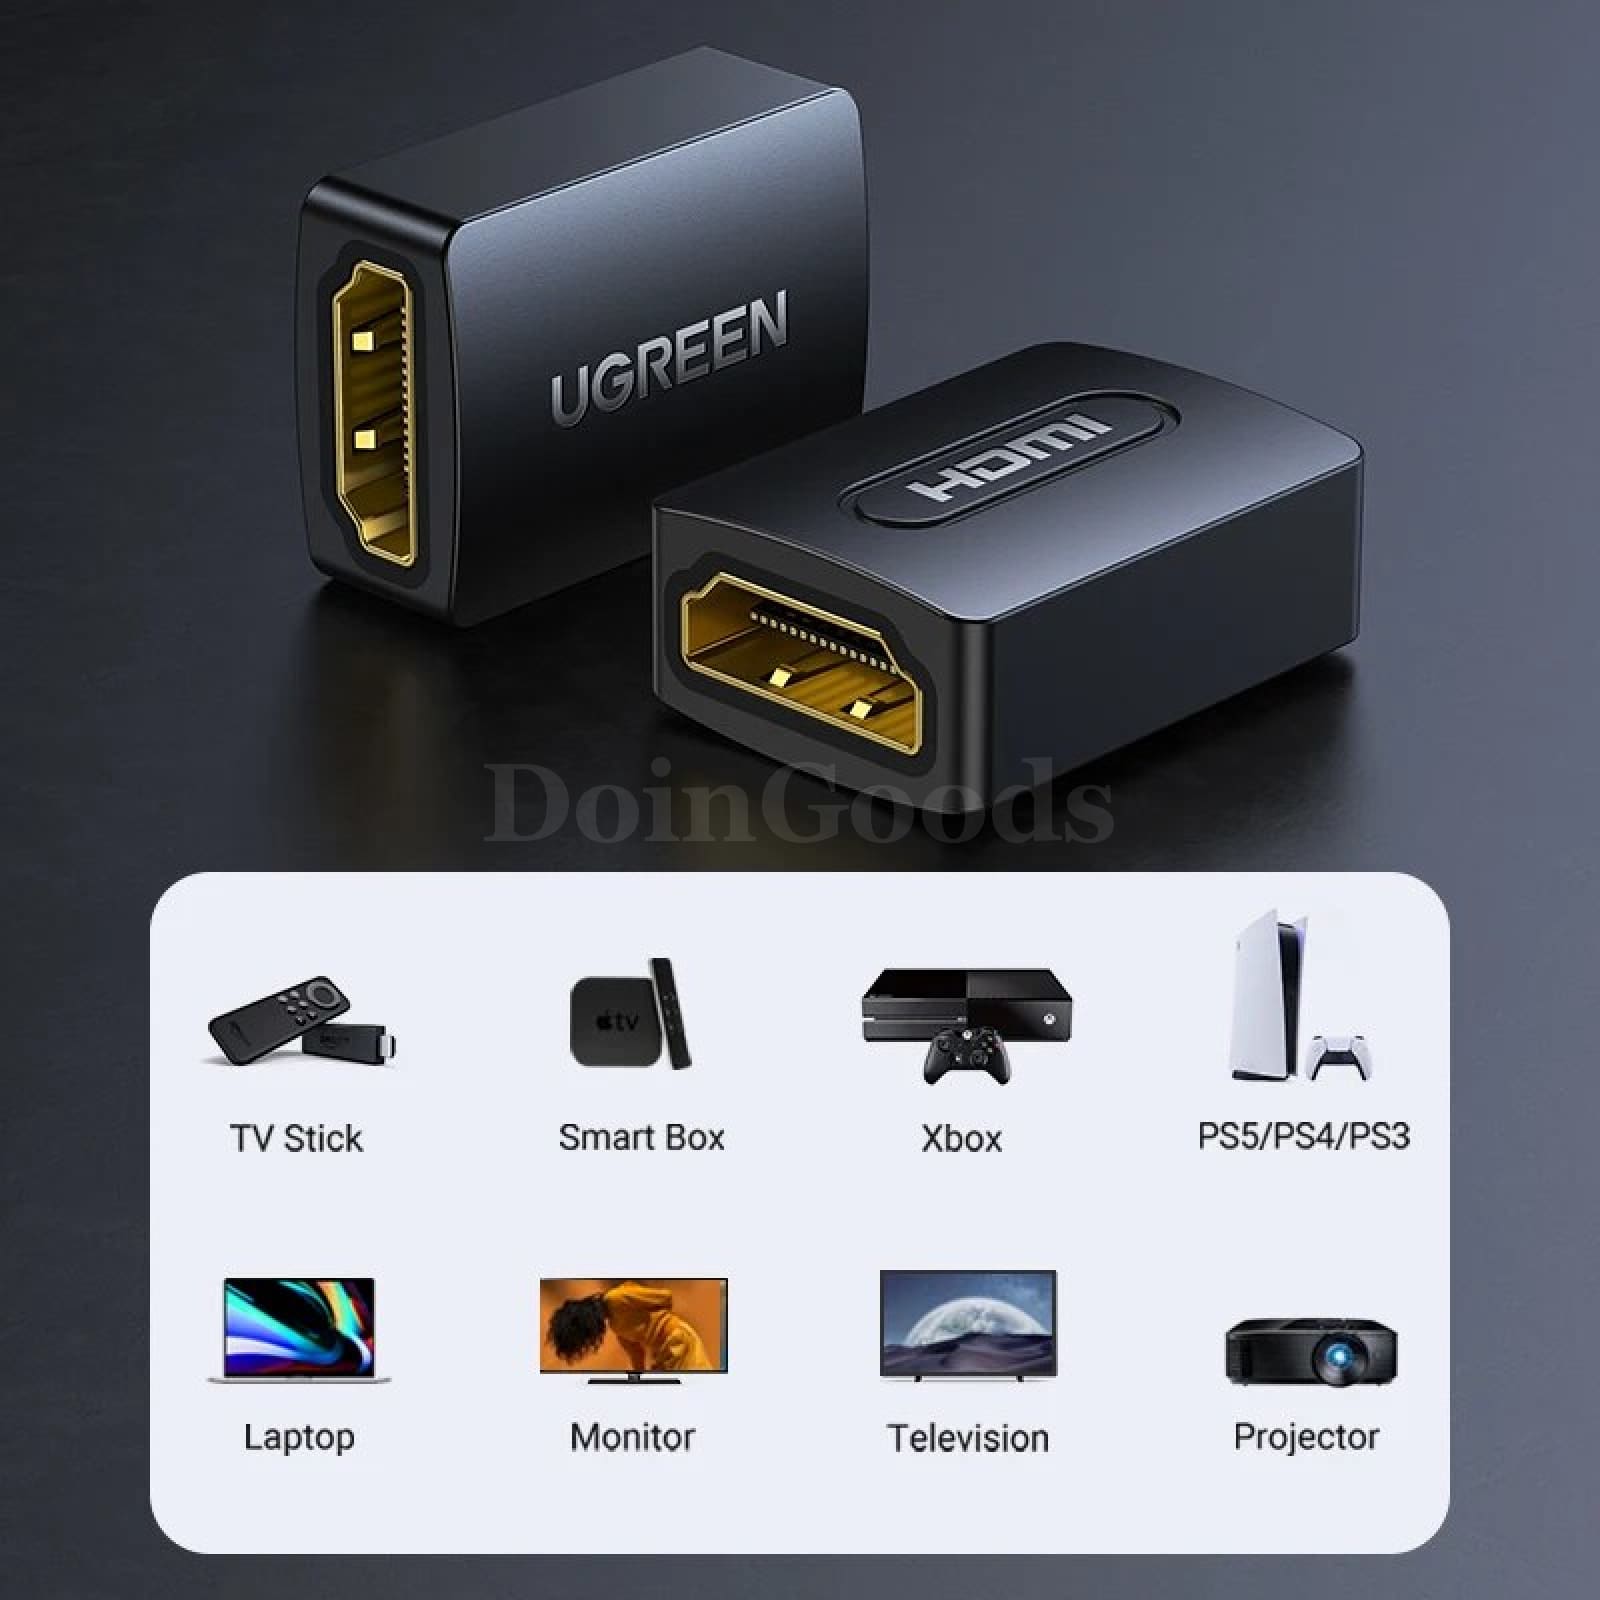 Ugreen Hdmi Extender - 4K 2.0 Female To Coupler For Ps4 Cable 301635